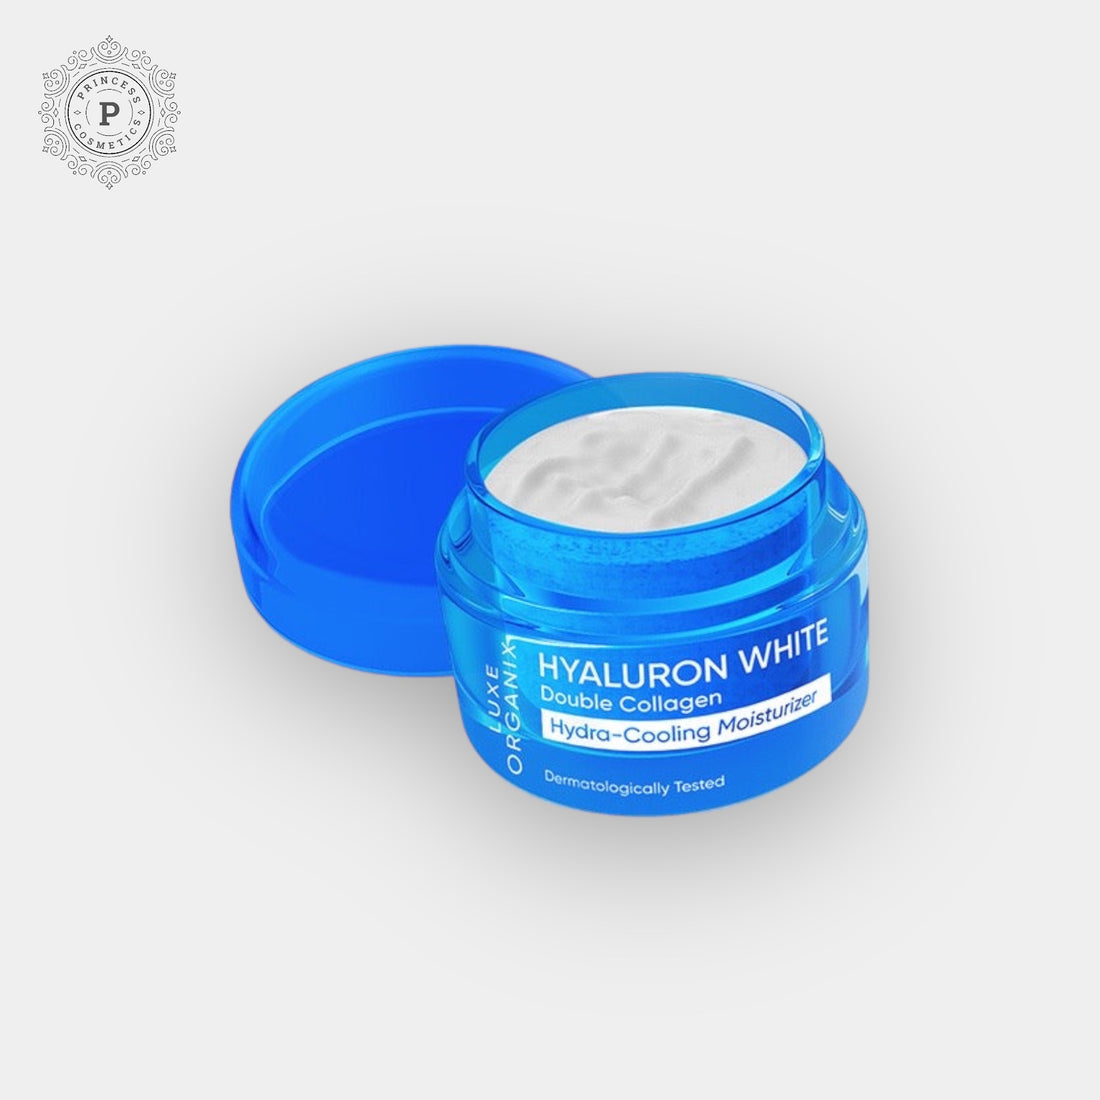 Luxe Organix Hyaluron White Double Collagen Hydra-Cooling Moisturizer 50g